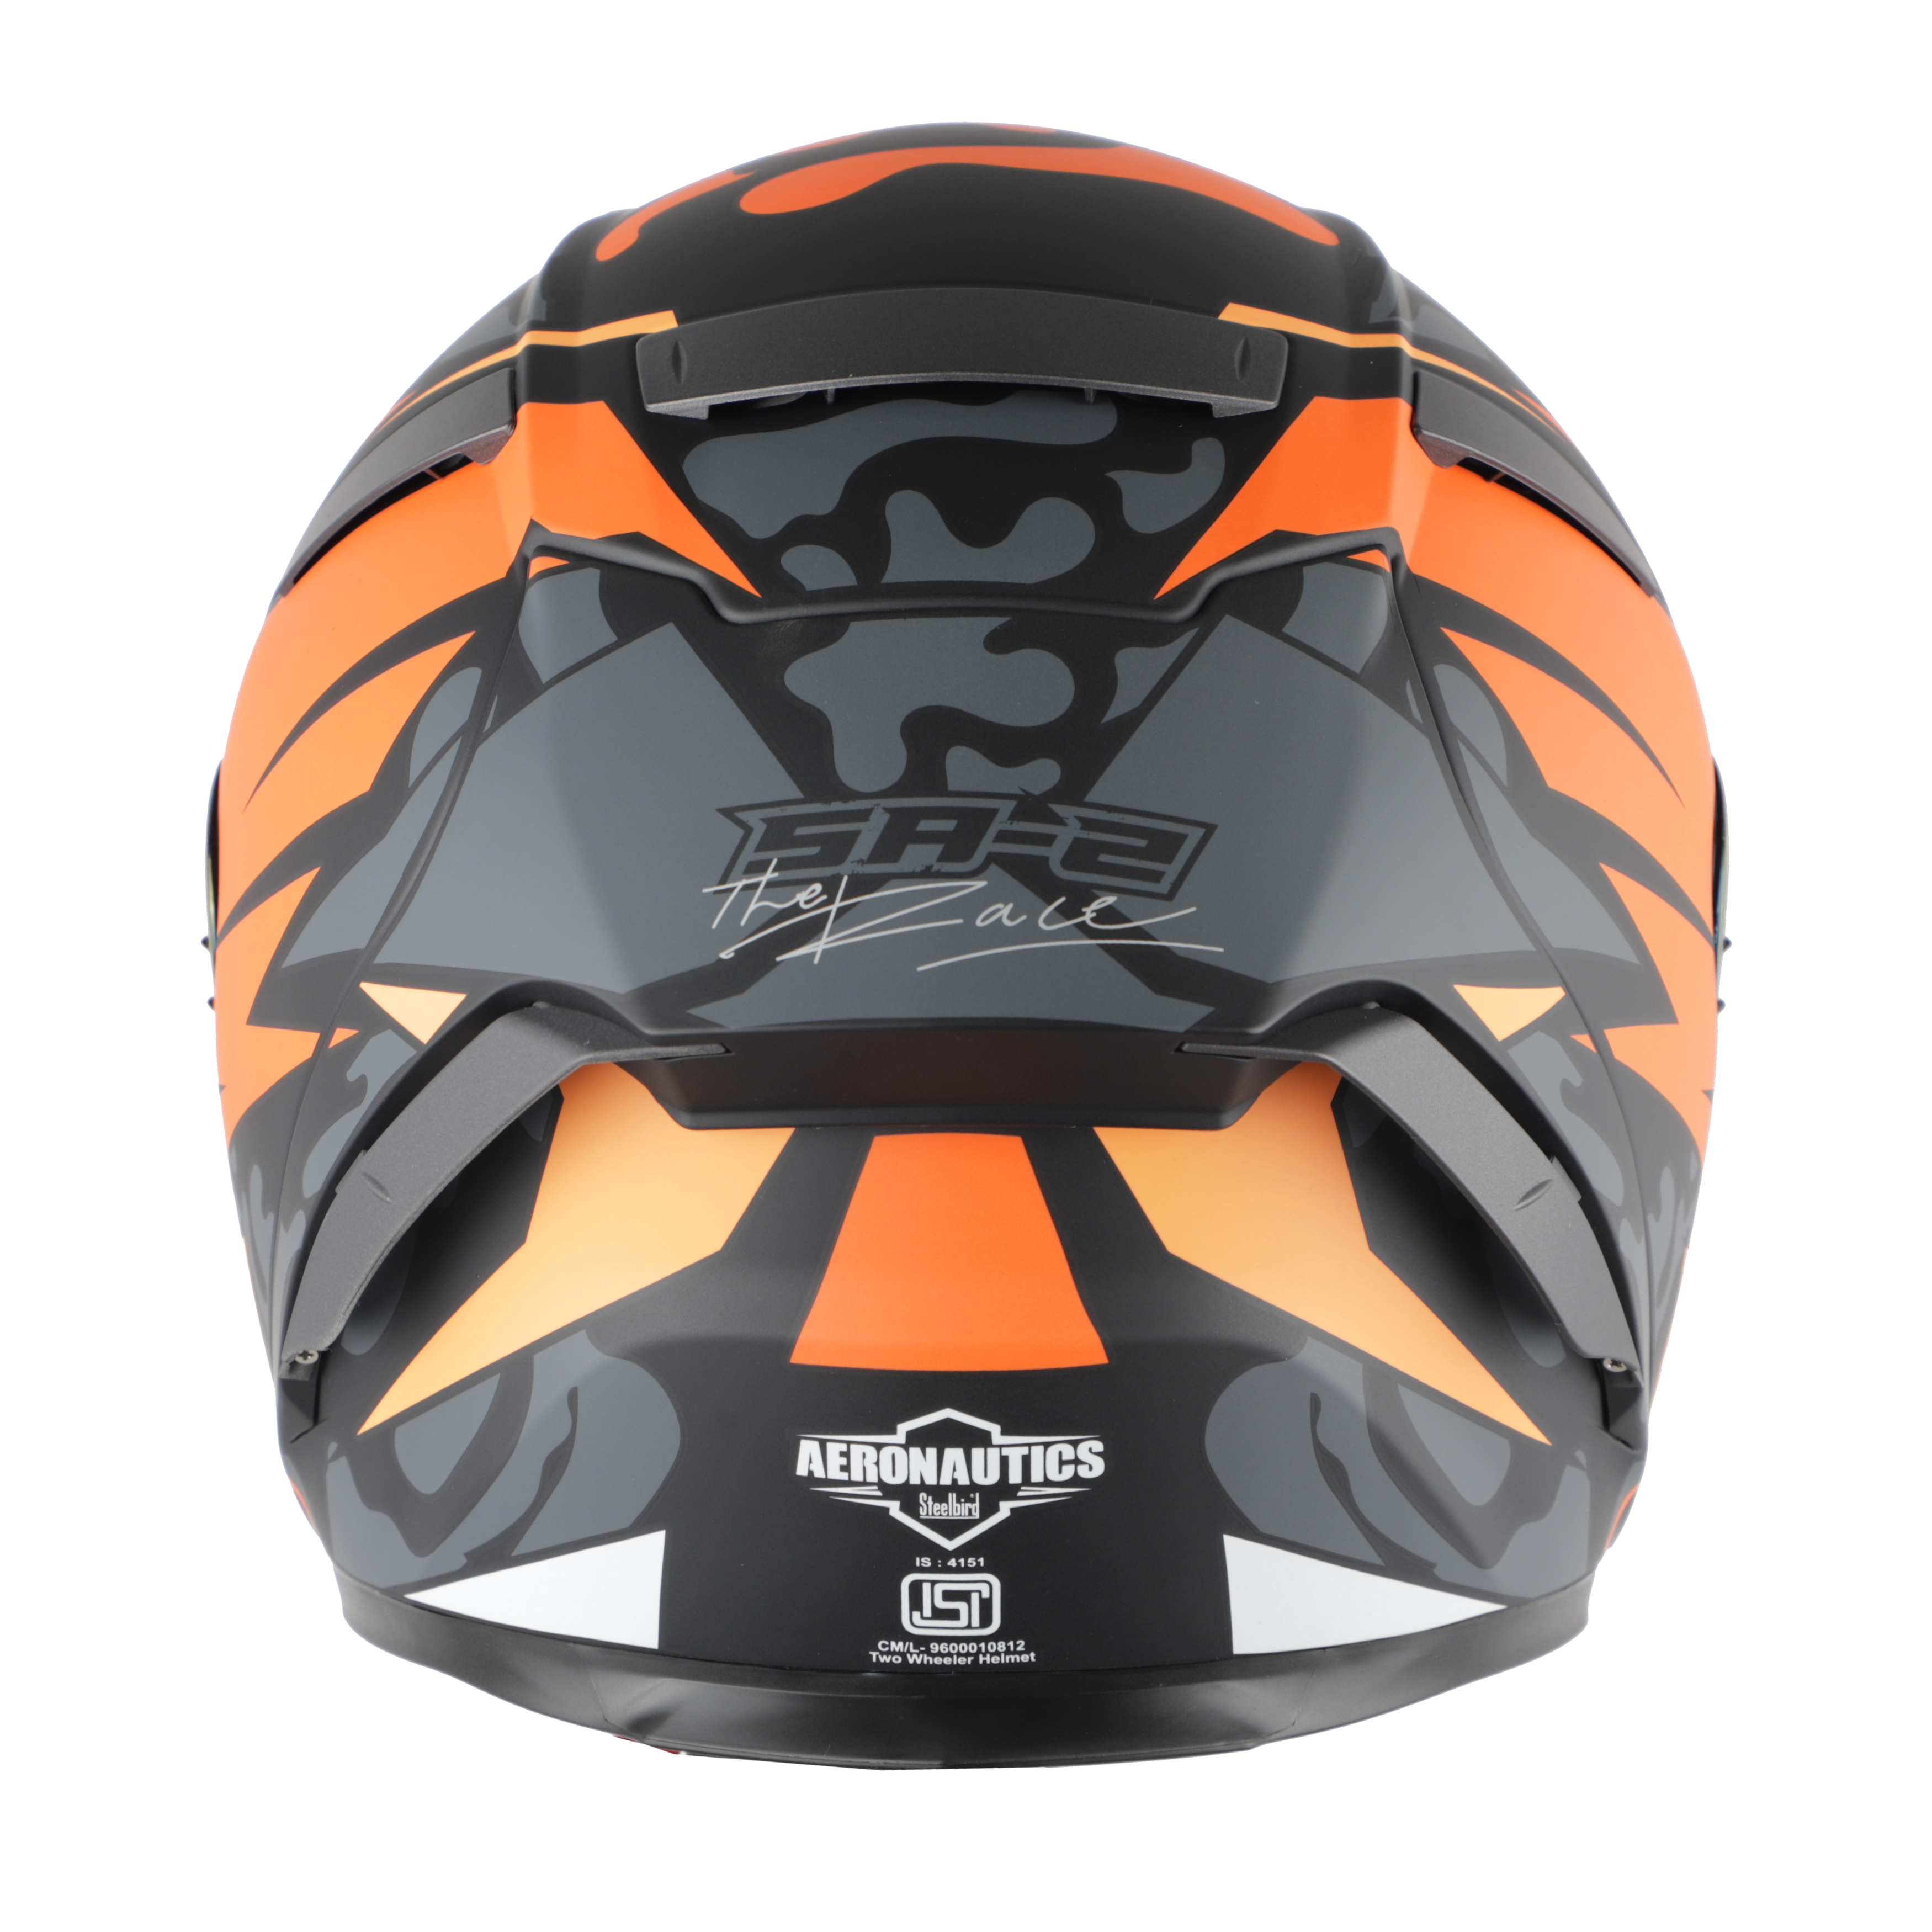 SA-2 TERMINATOR 3.0 GLOSSY BLACK WITH ORANGE FITTED WITH CLEAR VISOR EXTRA RAINBOW CHROME VISOR FREE (WITH ANTI-FOR SHIELD HOLDER)